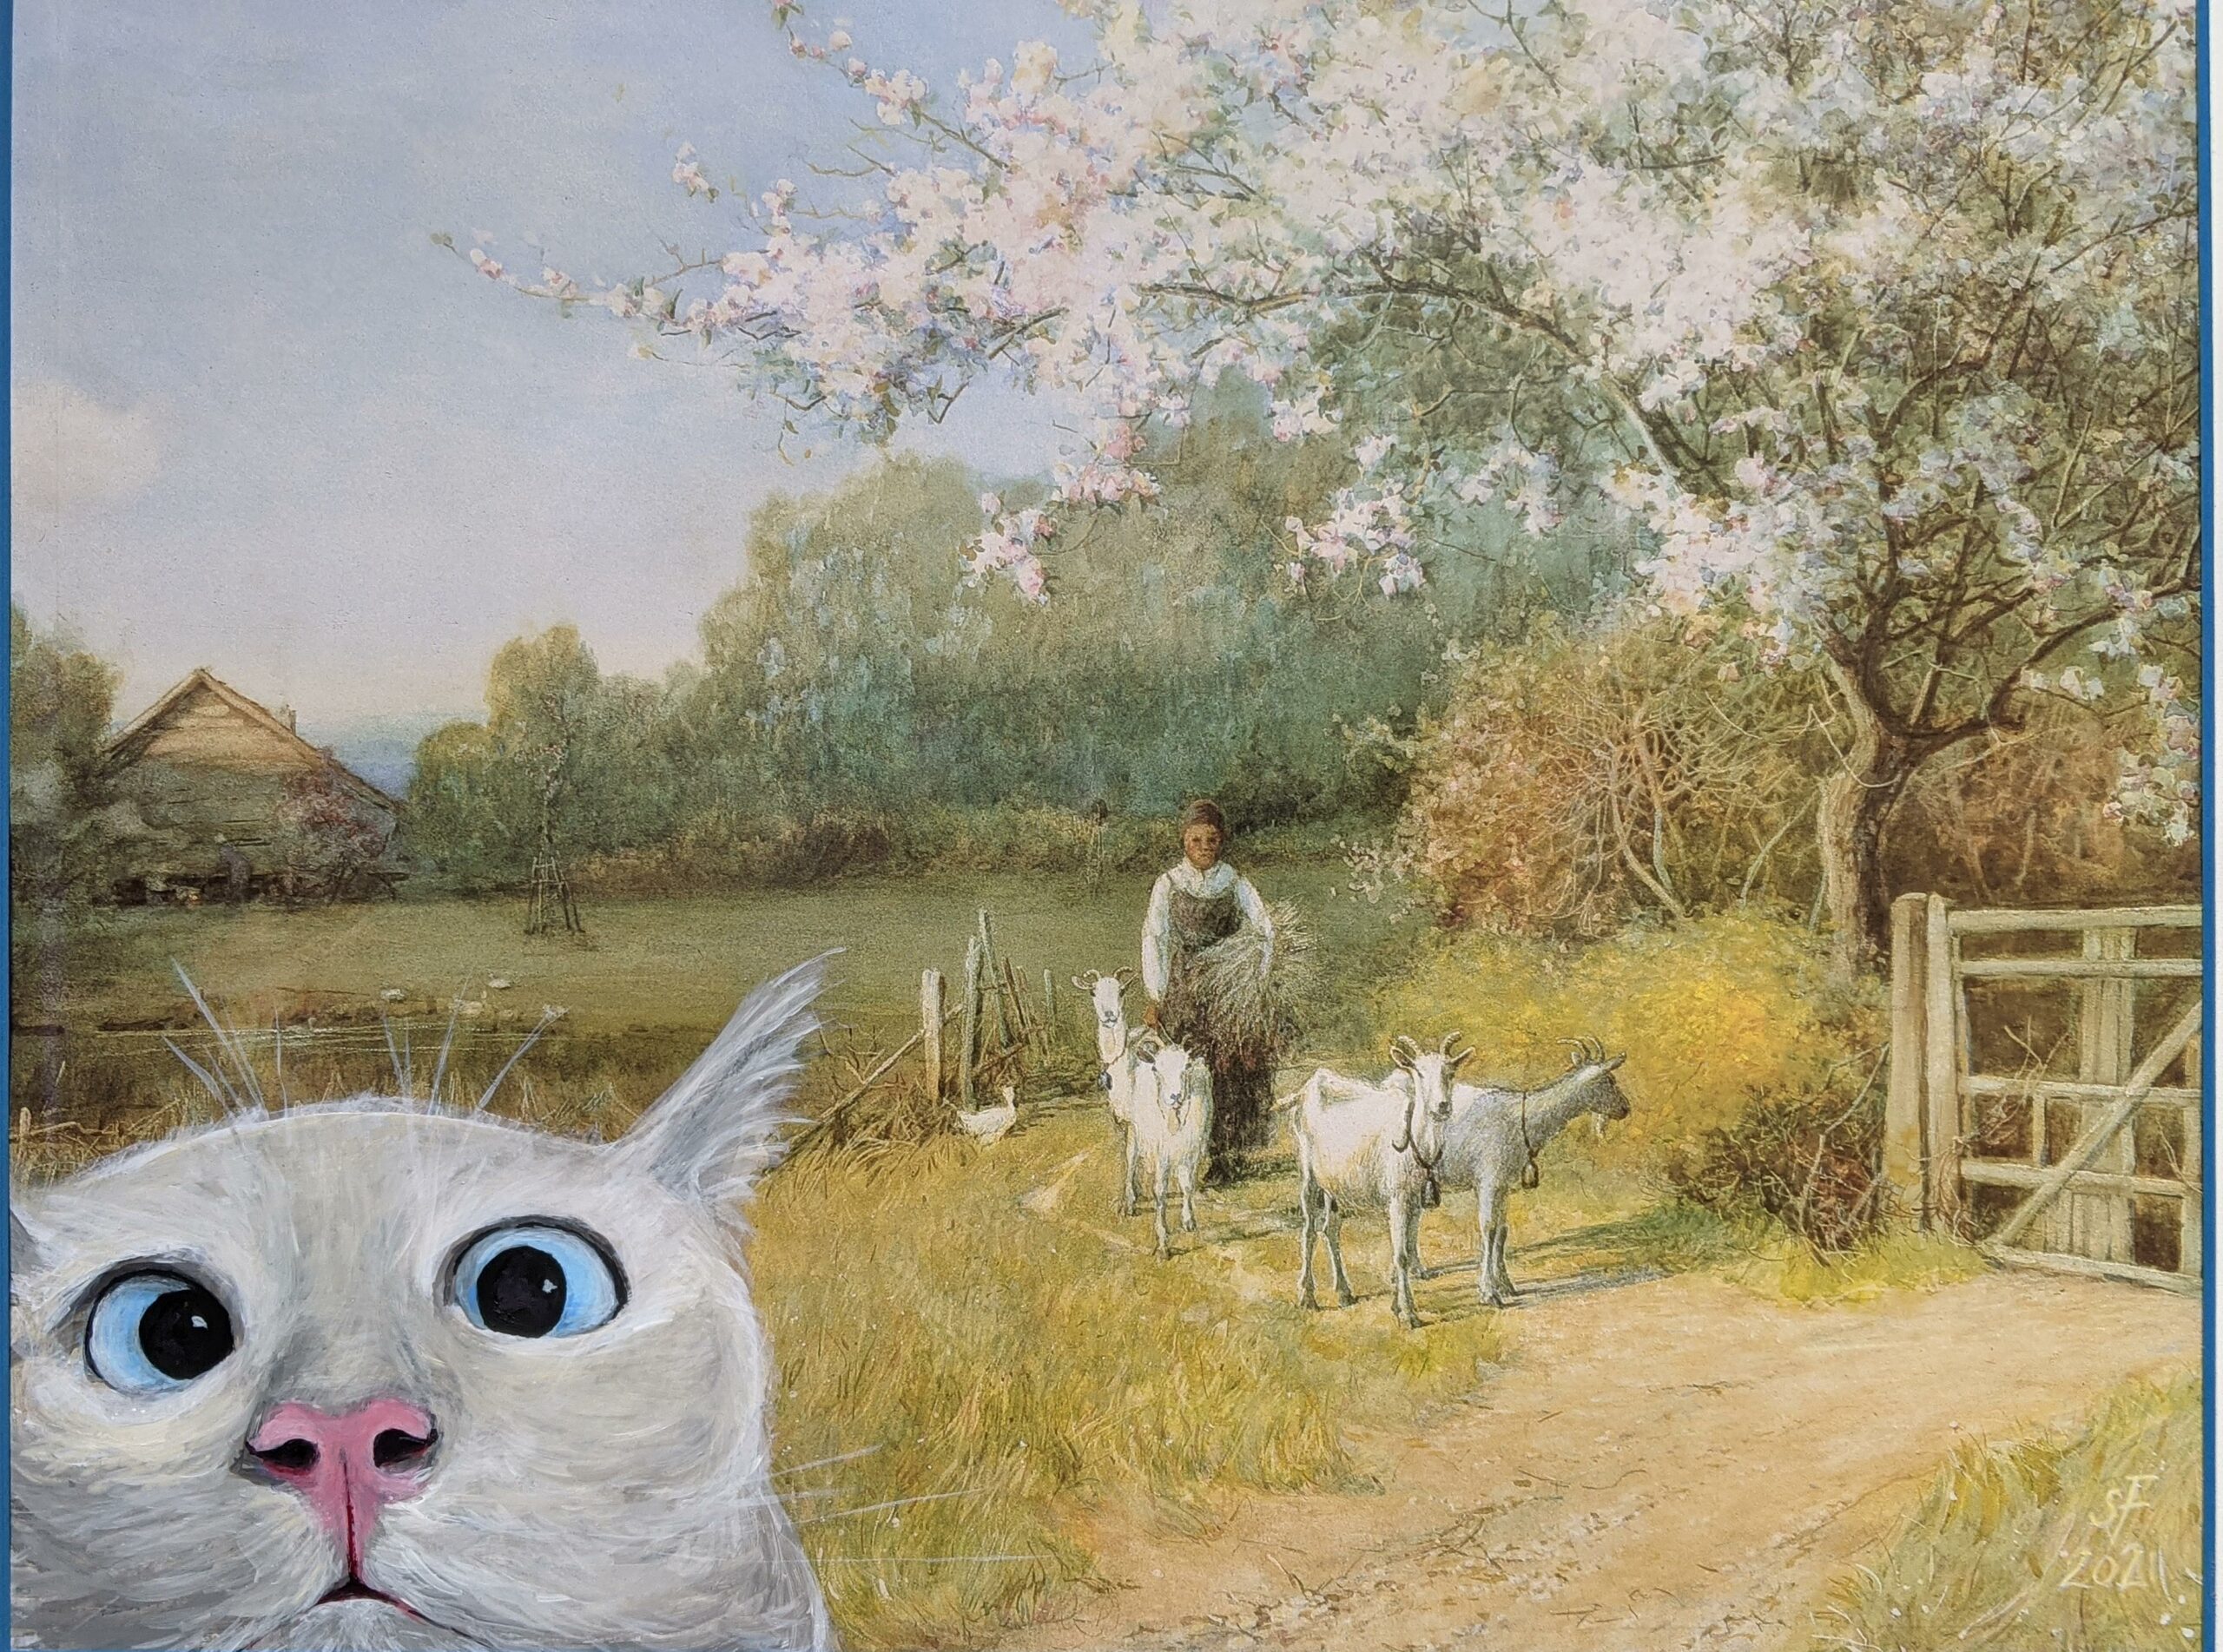 a painting of a woman guiding goats to a gate with her home in the distance. a white cat with light blue eyes has been added to the bottom left corner. the cat is so close that all we can see is their face.